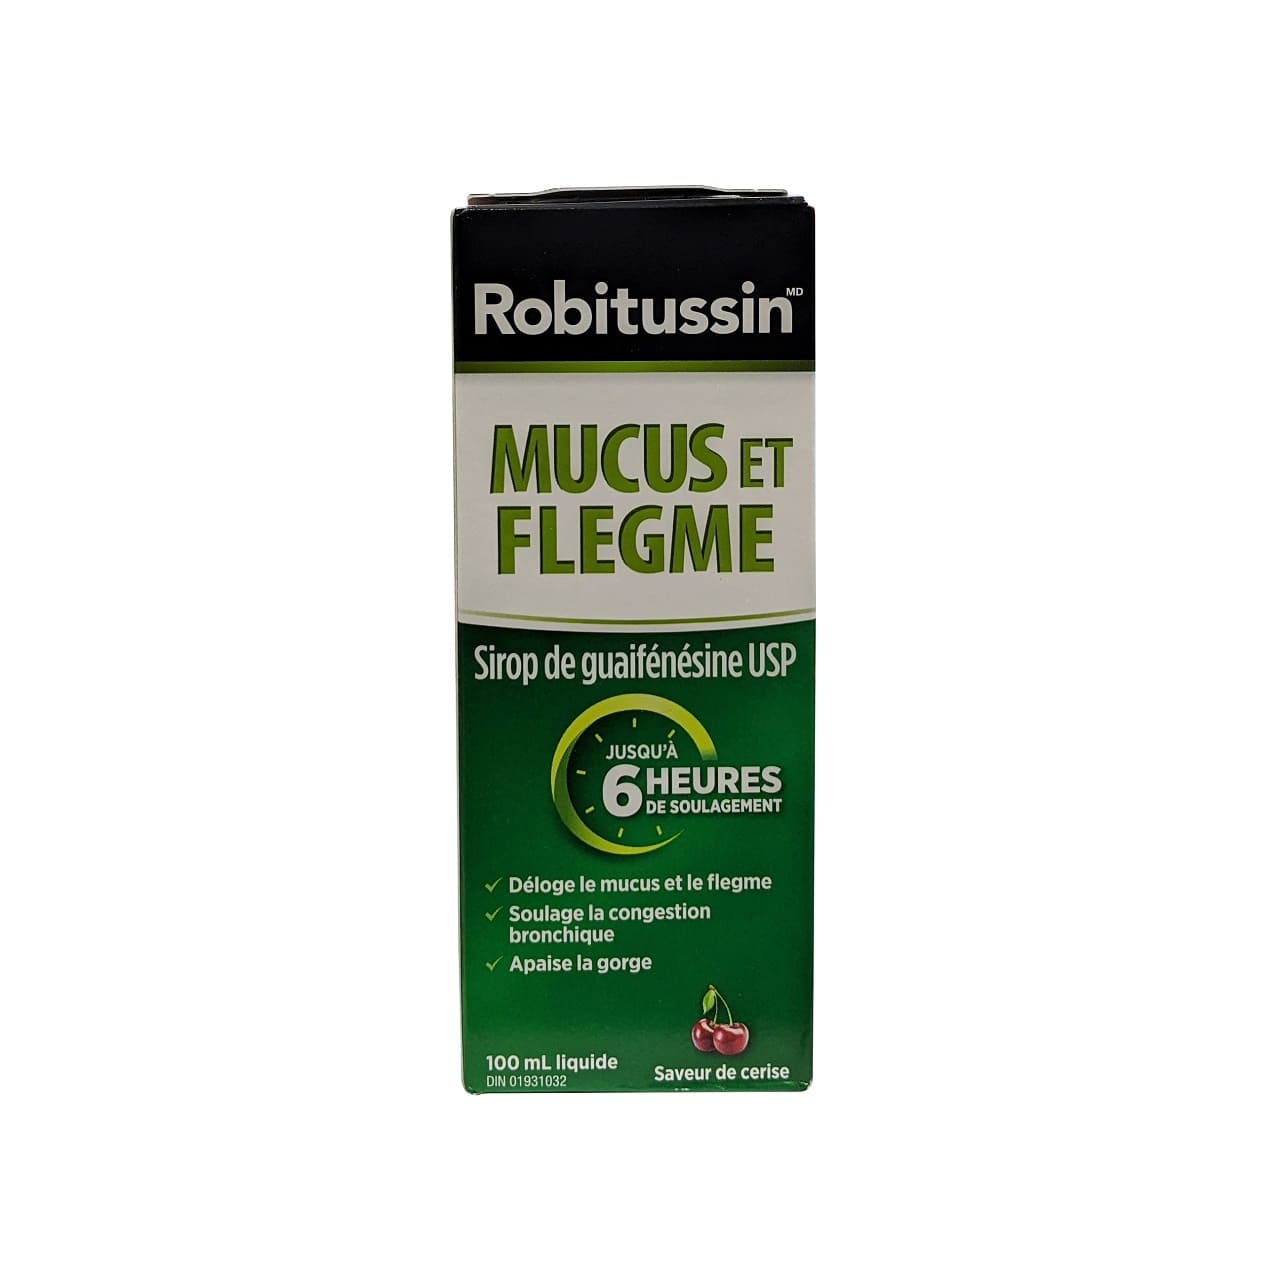 Product label for Robitussin Regular Strength Mucus & Phlegm for 6 Hours Relief (100 mL) in French